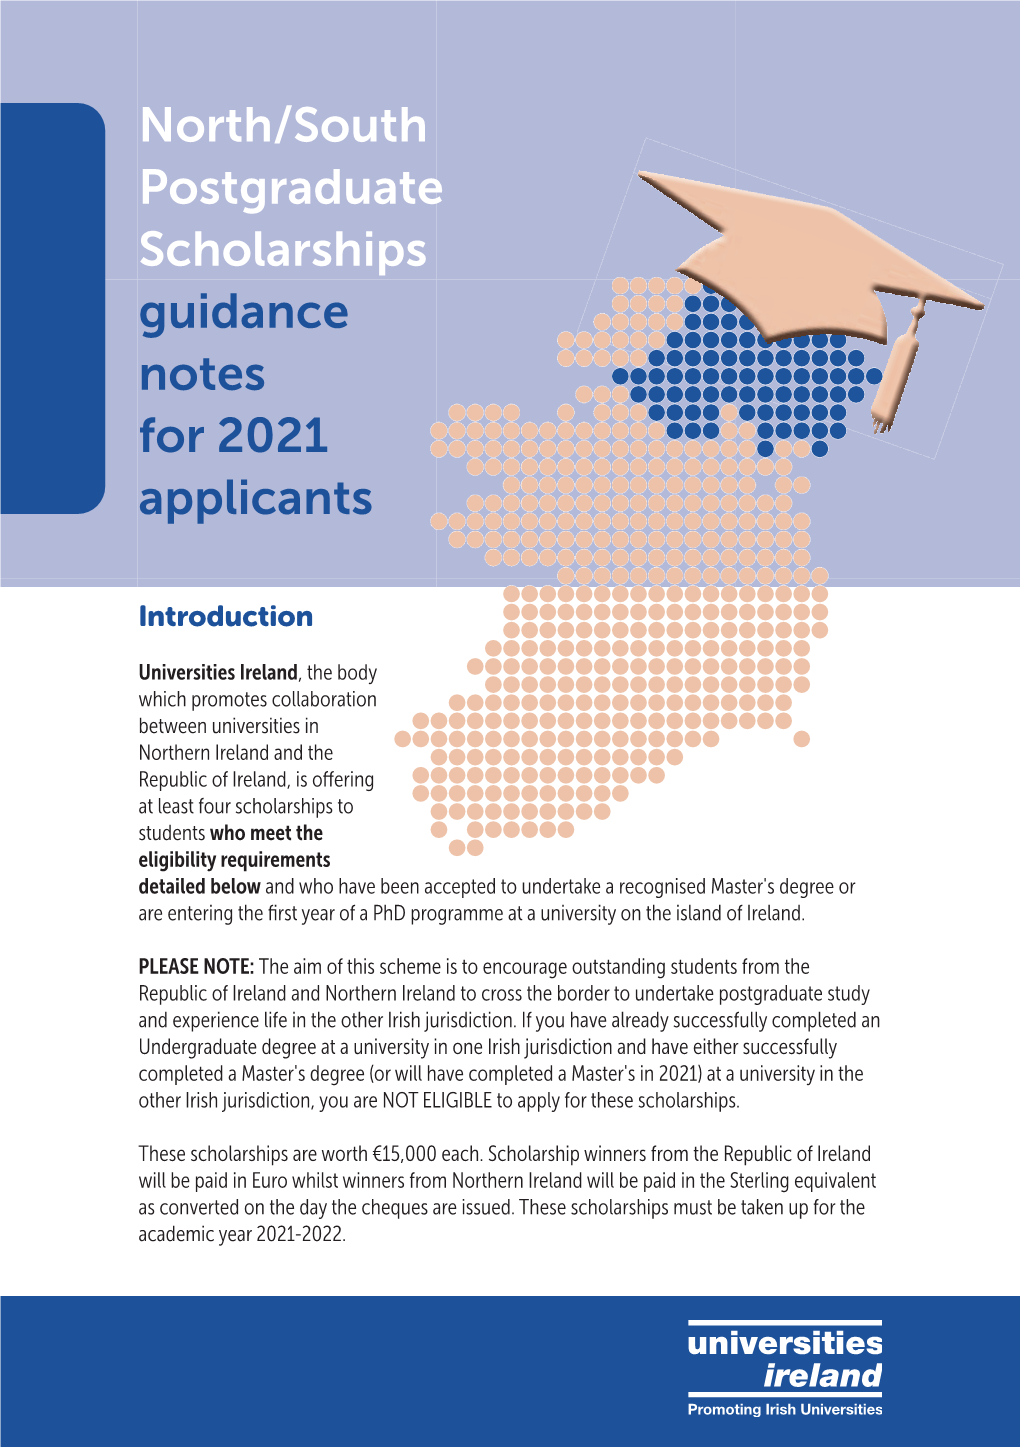 North/South Postgraduate Scholarships Guidance Notes for 2021 Applicants